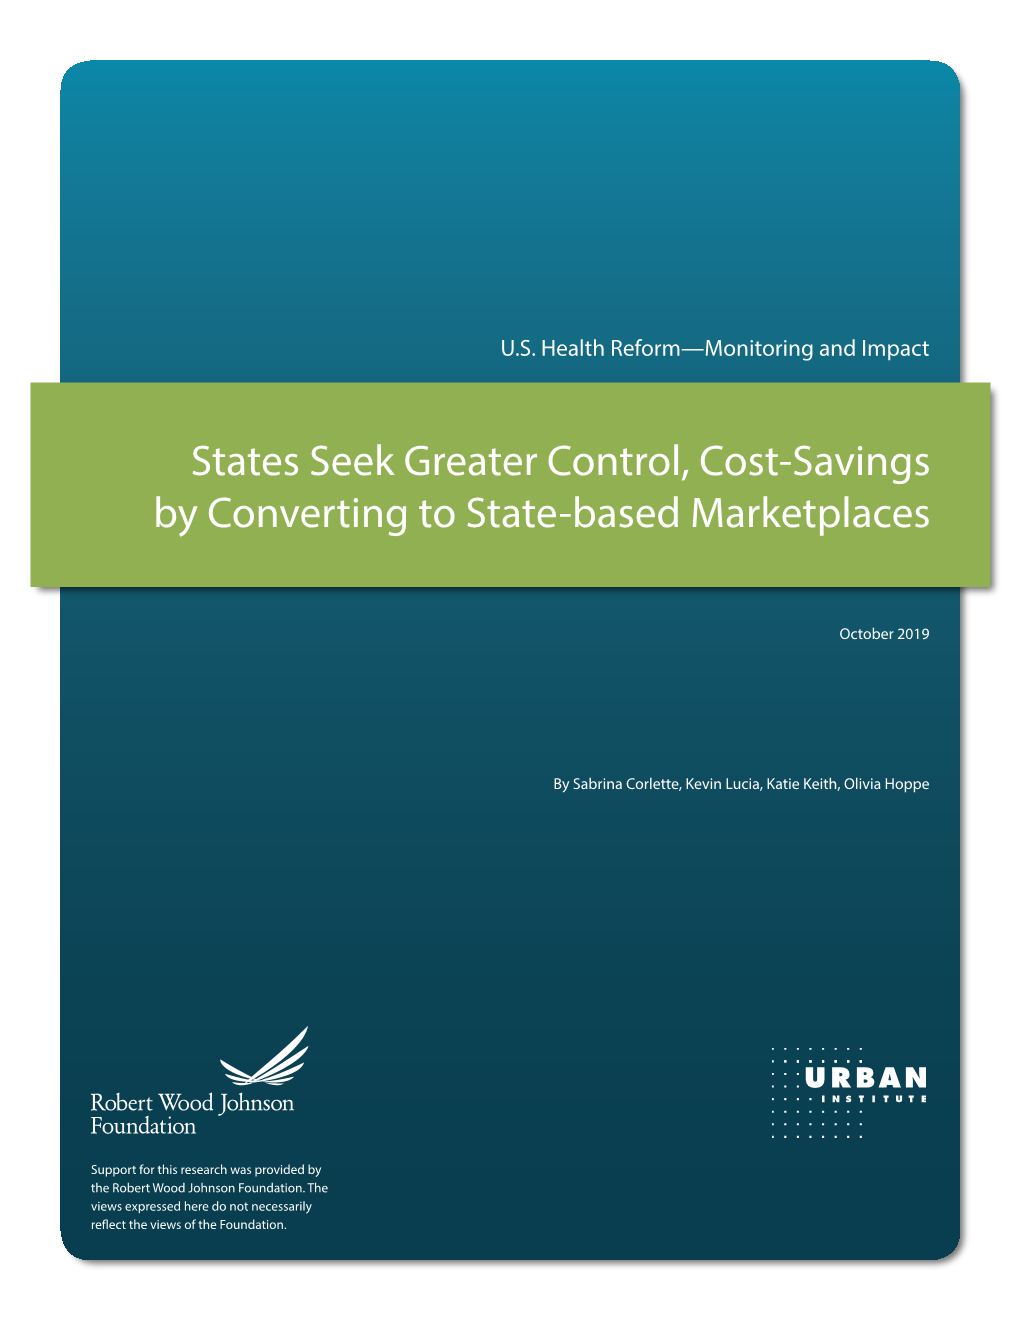 States Seek Greater Control, Cost-Savings by Converting to State-Based Marketplaces